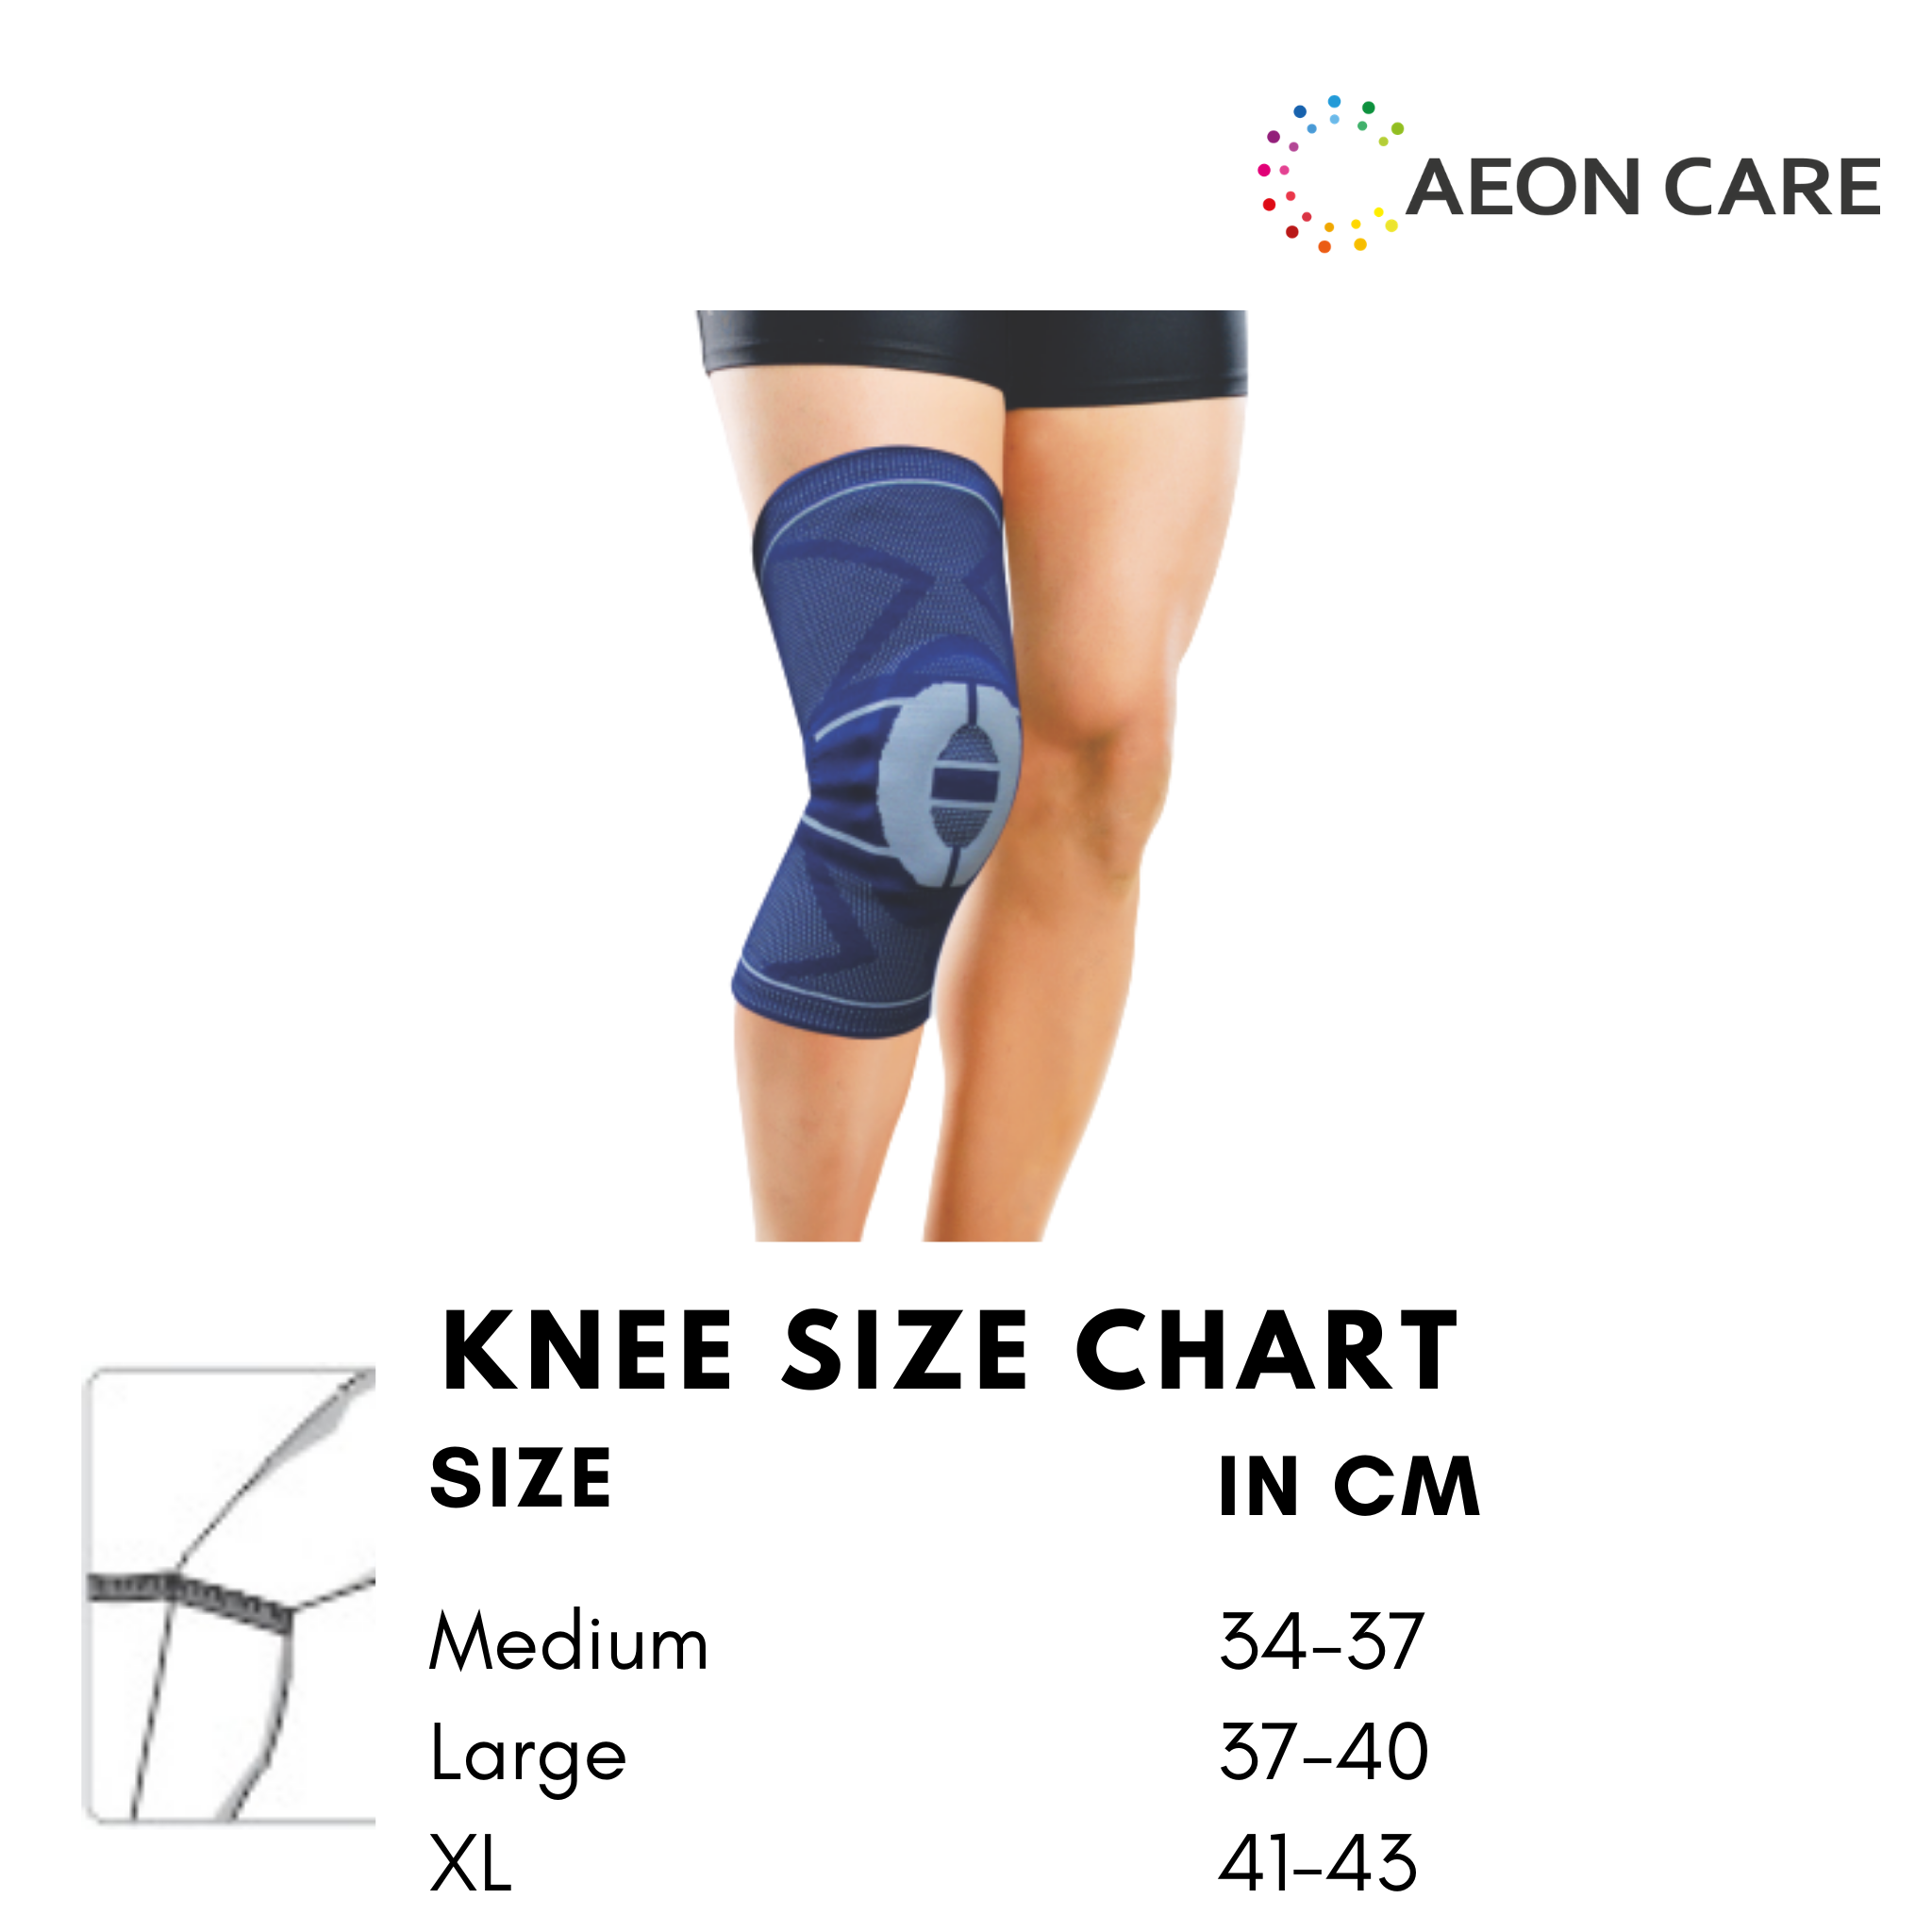 knee brace size chart. How to measure size for Knee Brace